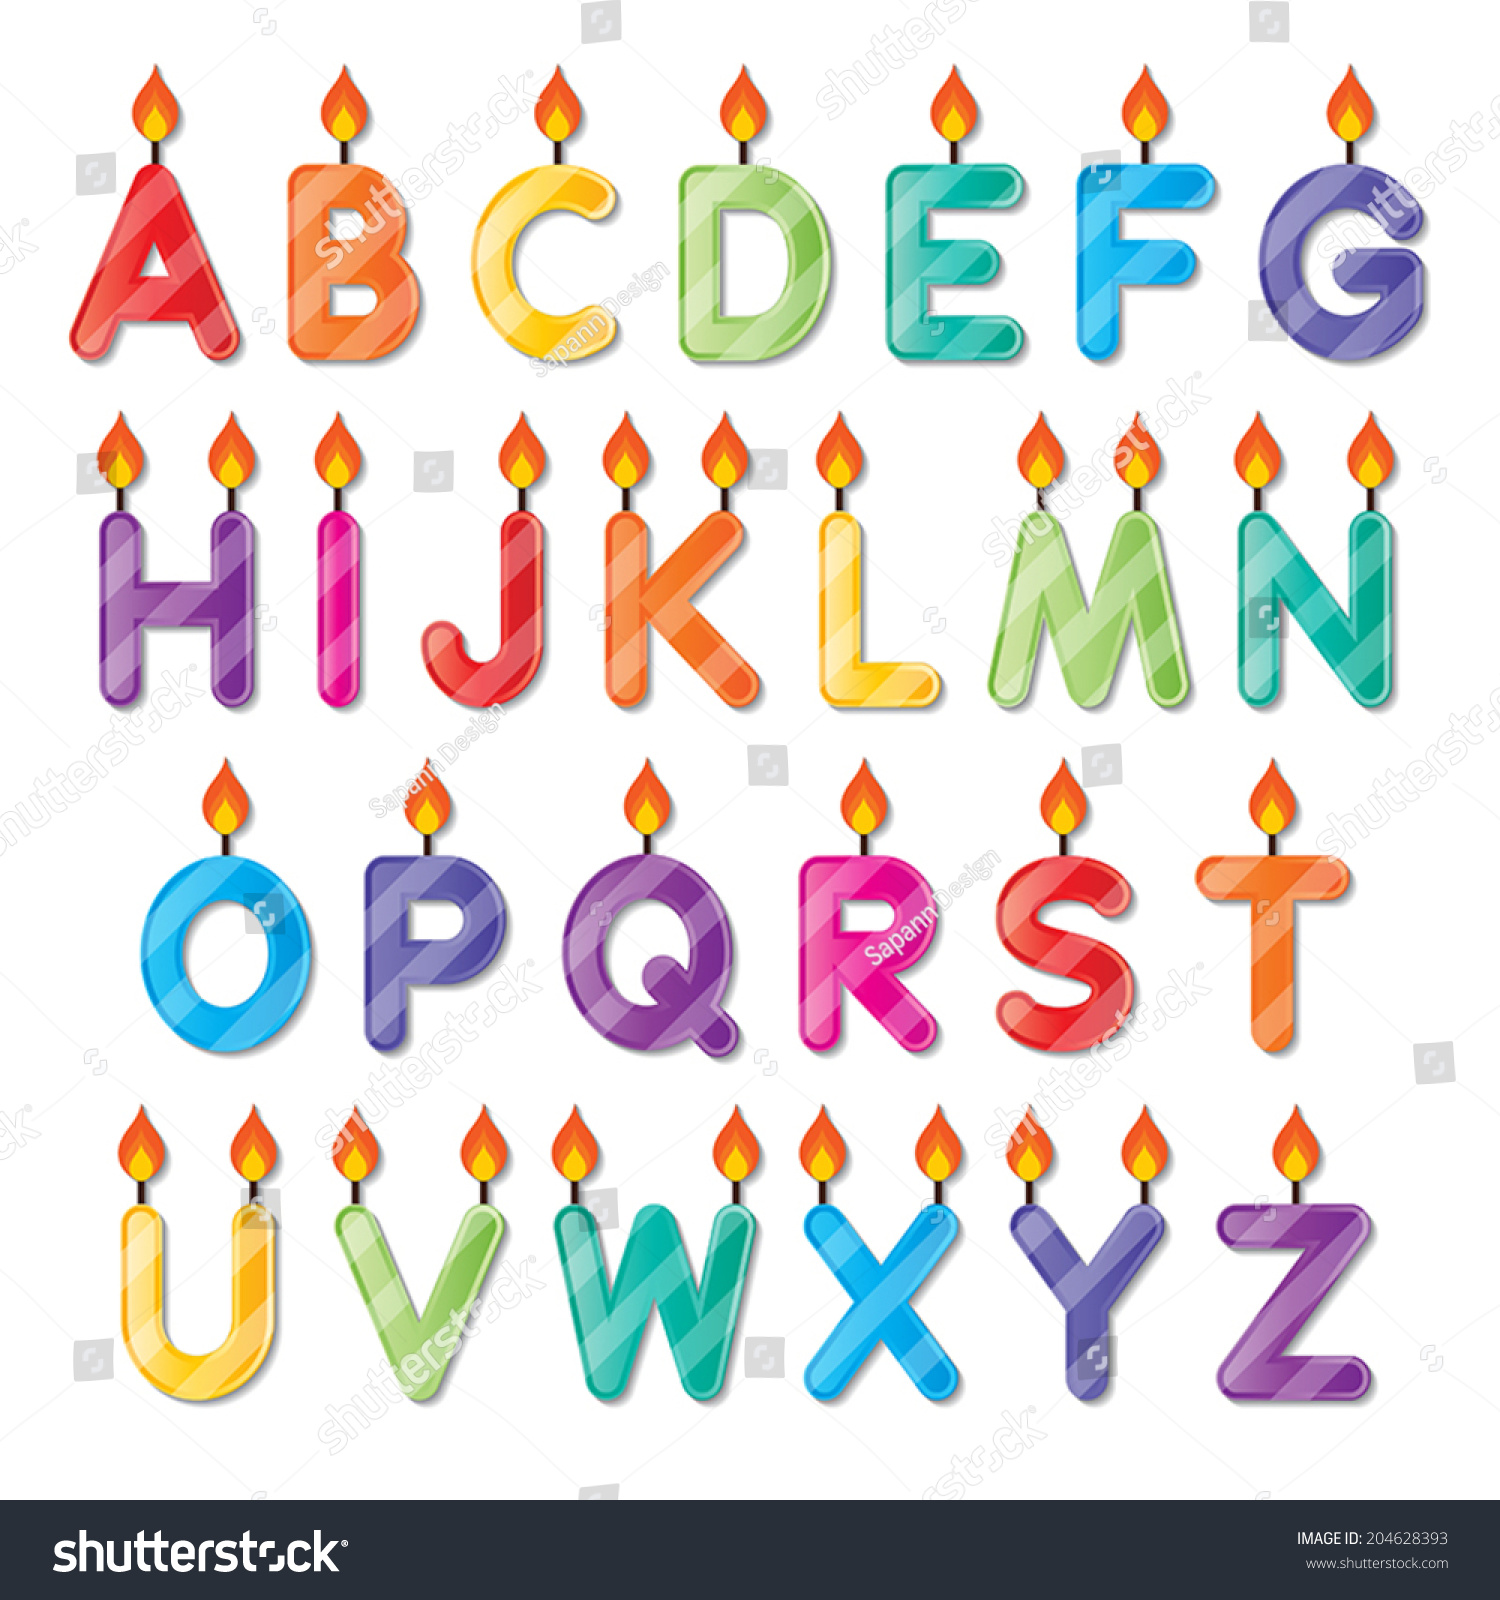 SVG of set of colorful capital alphabet letters A to Z candles. vector. svg